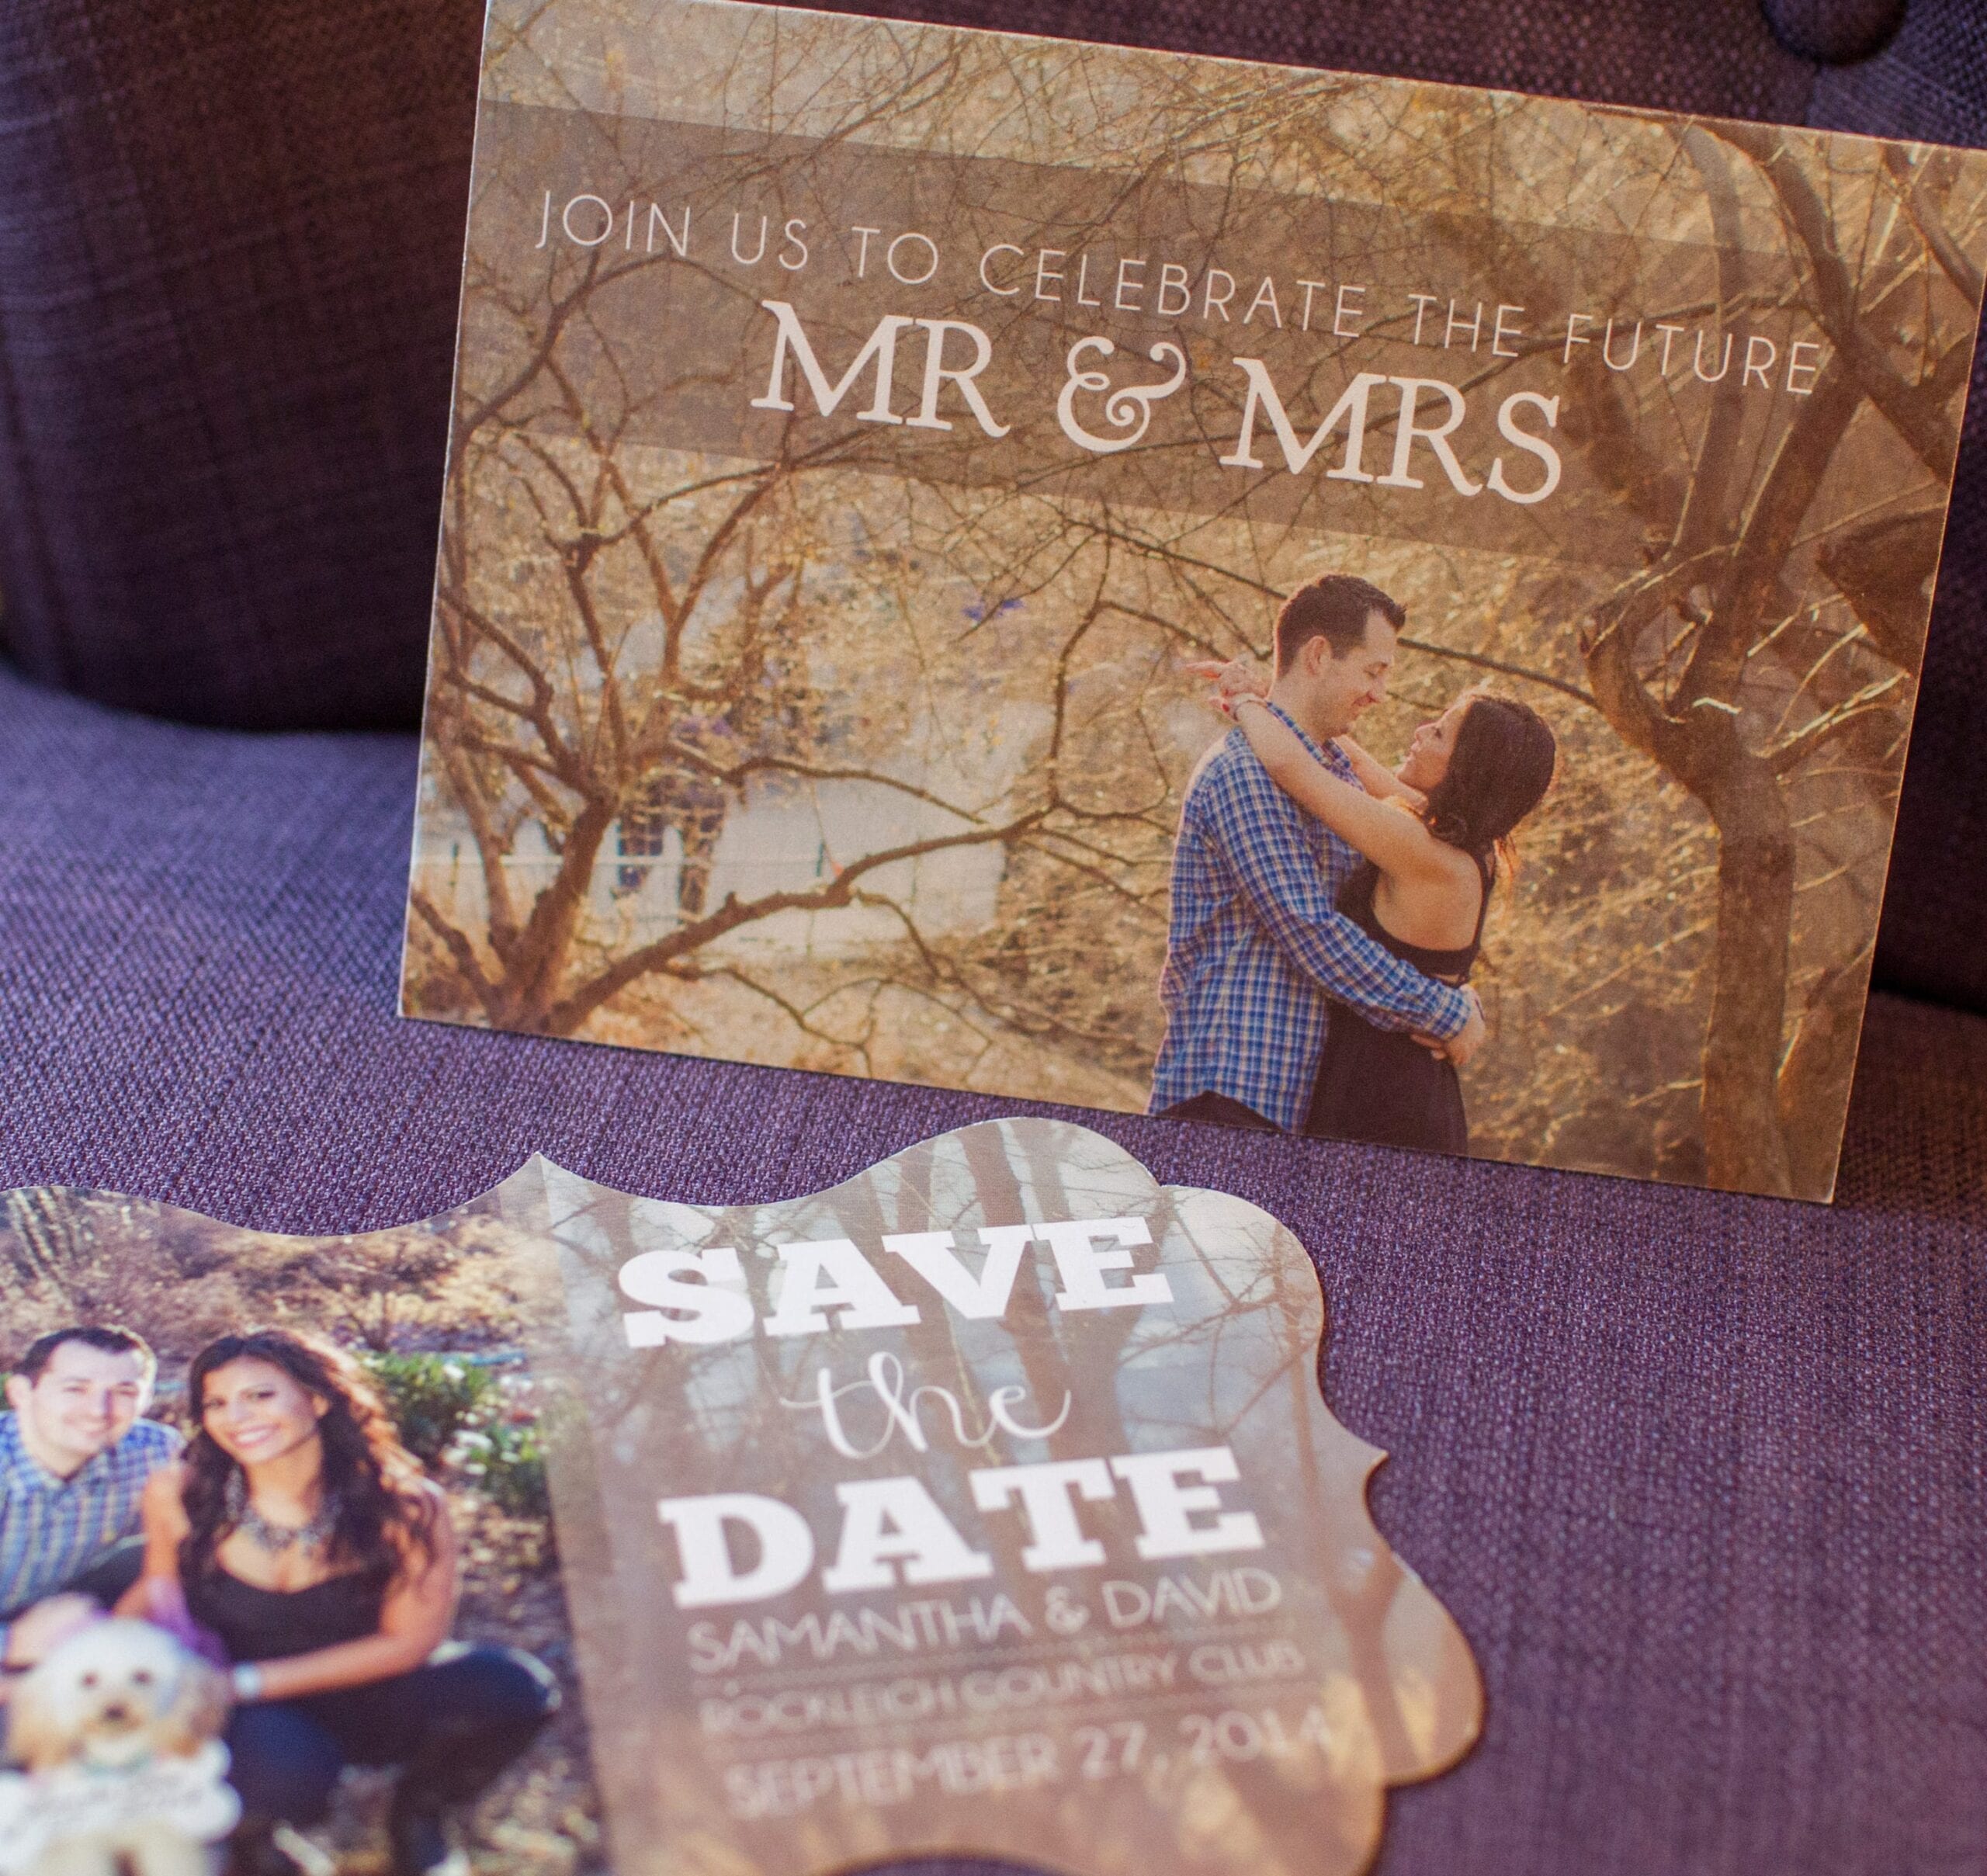 43 Creative Save the Date Ideas You'll Want to Order Now - Joy